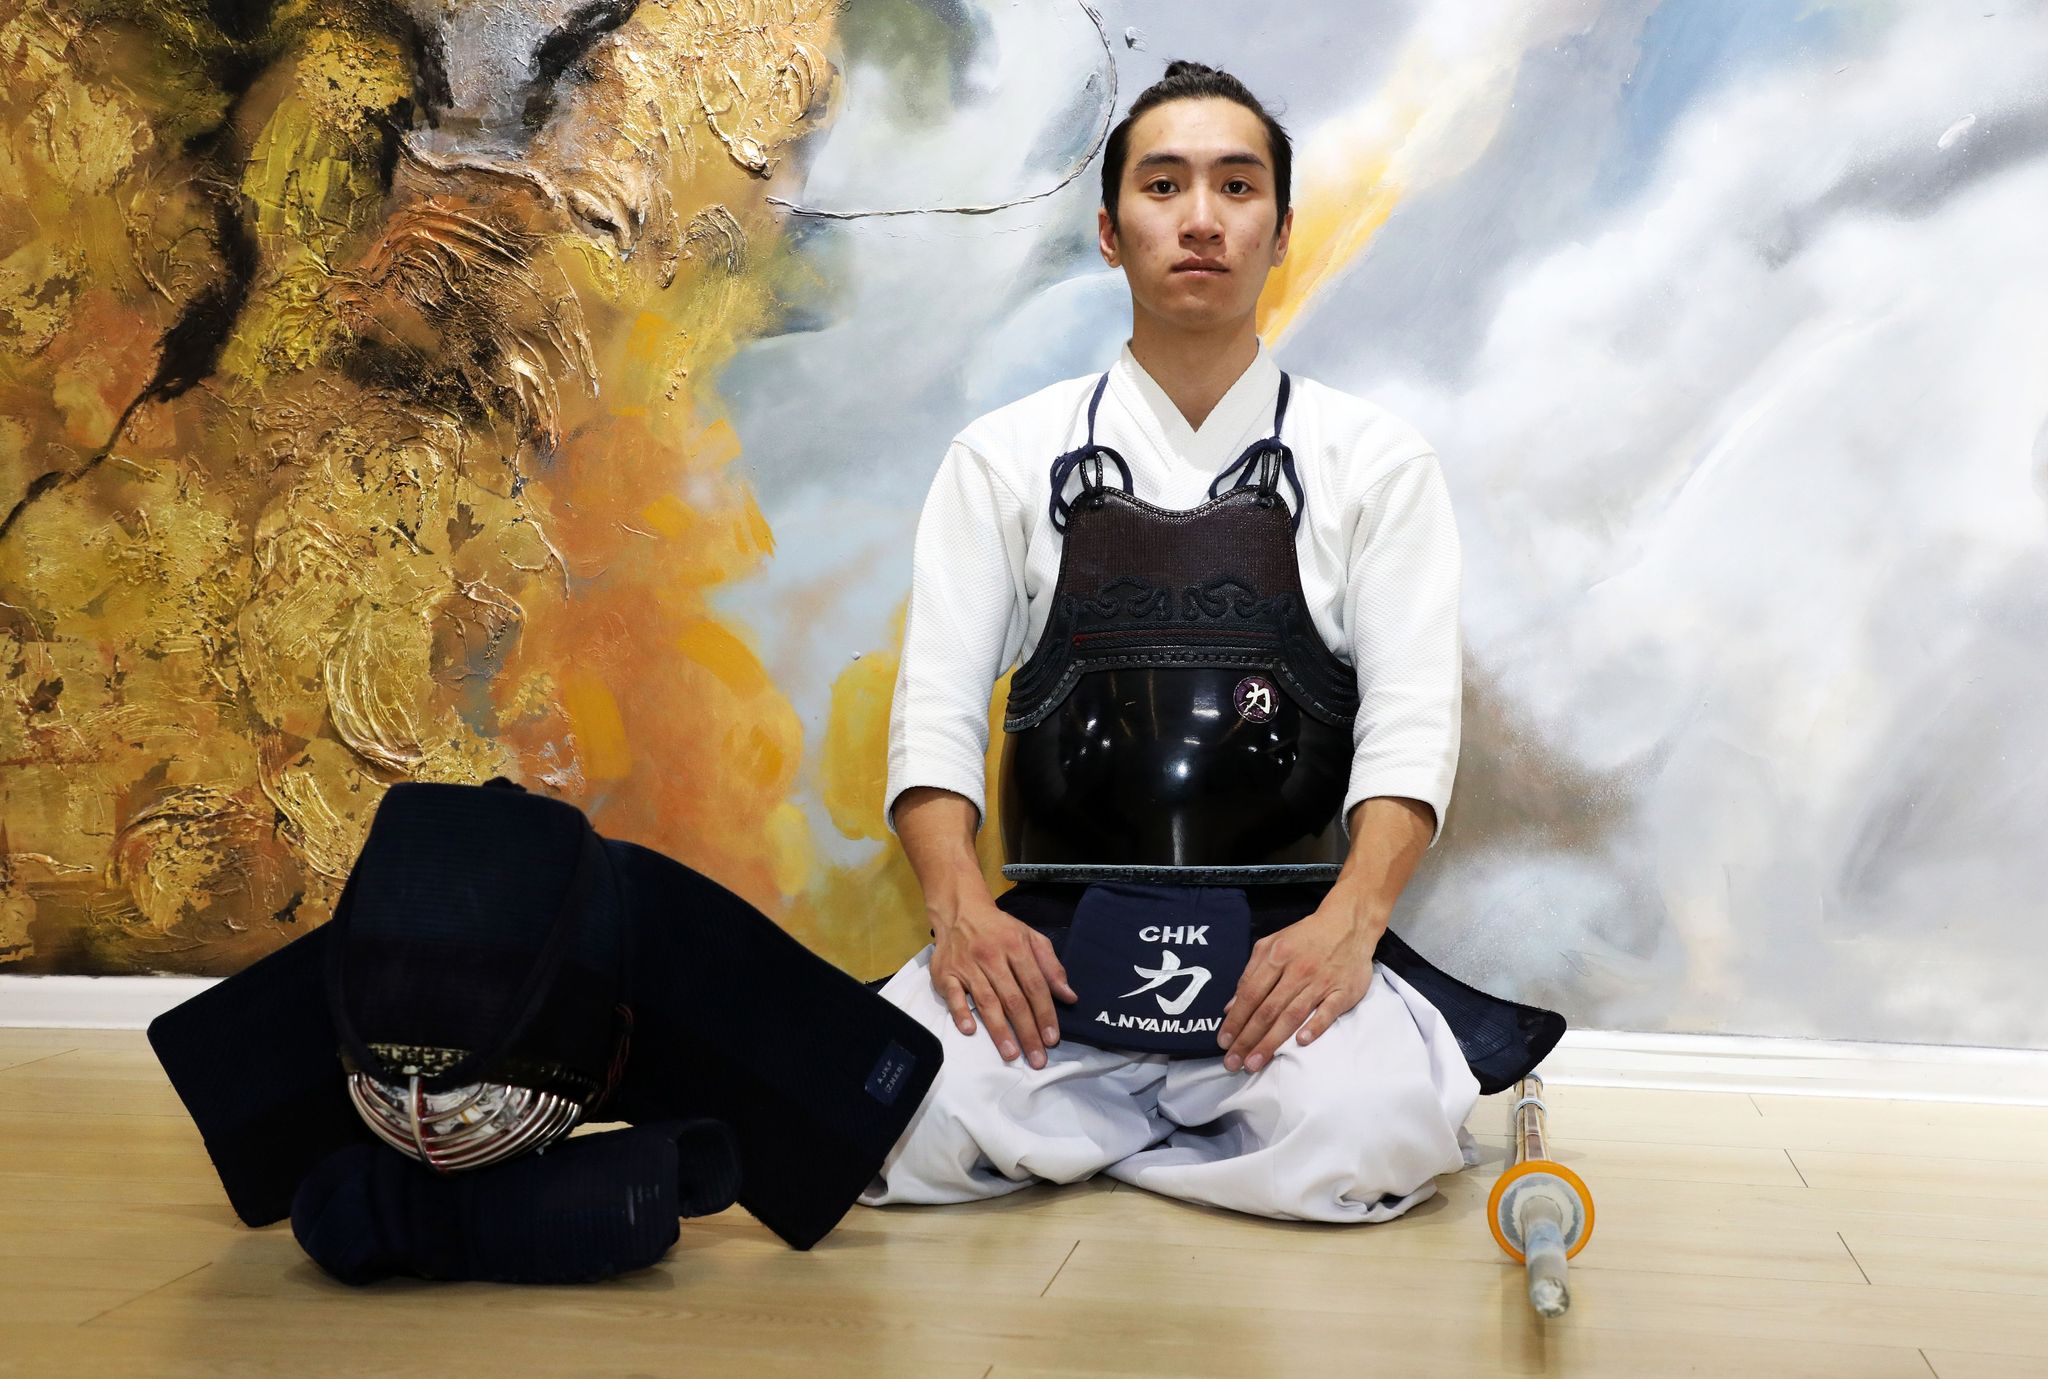 A.NYAMJAV: Kendo helps find inner peace